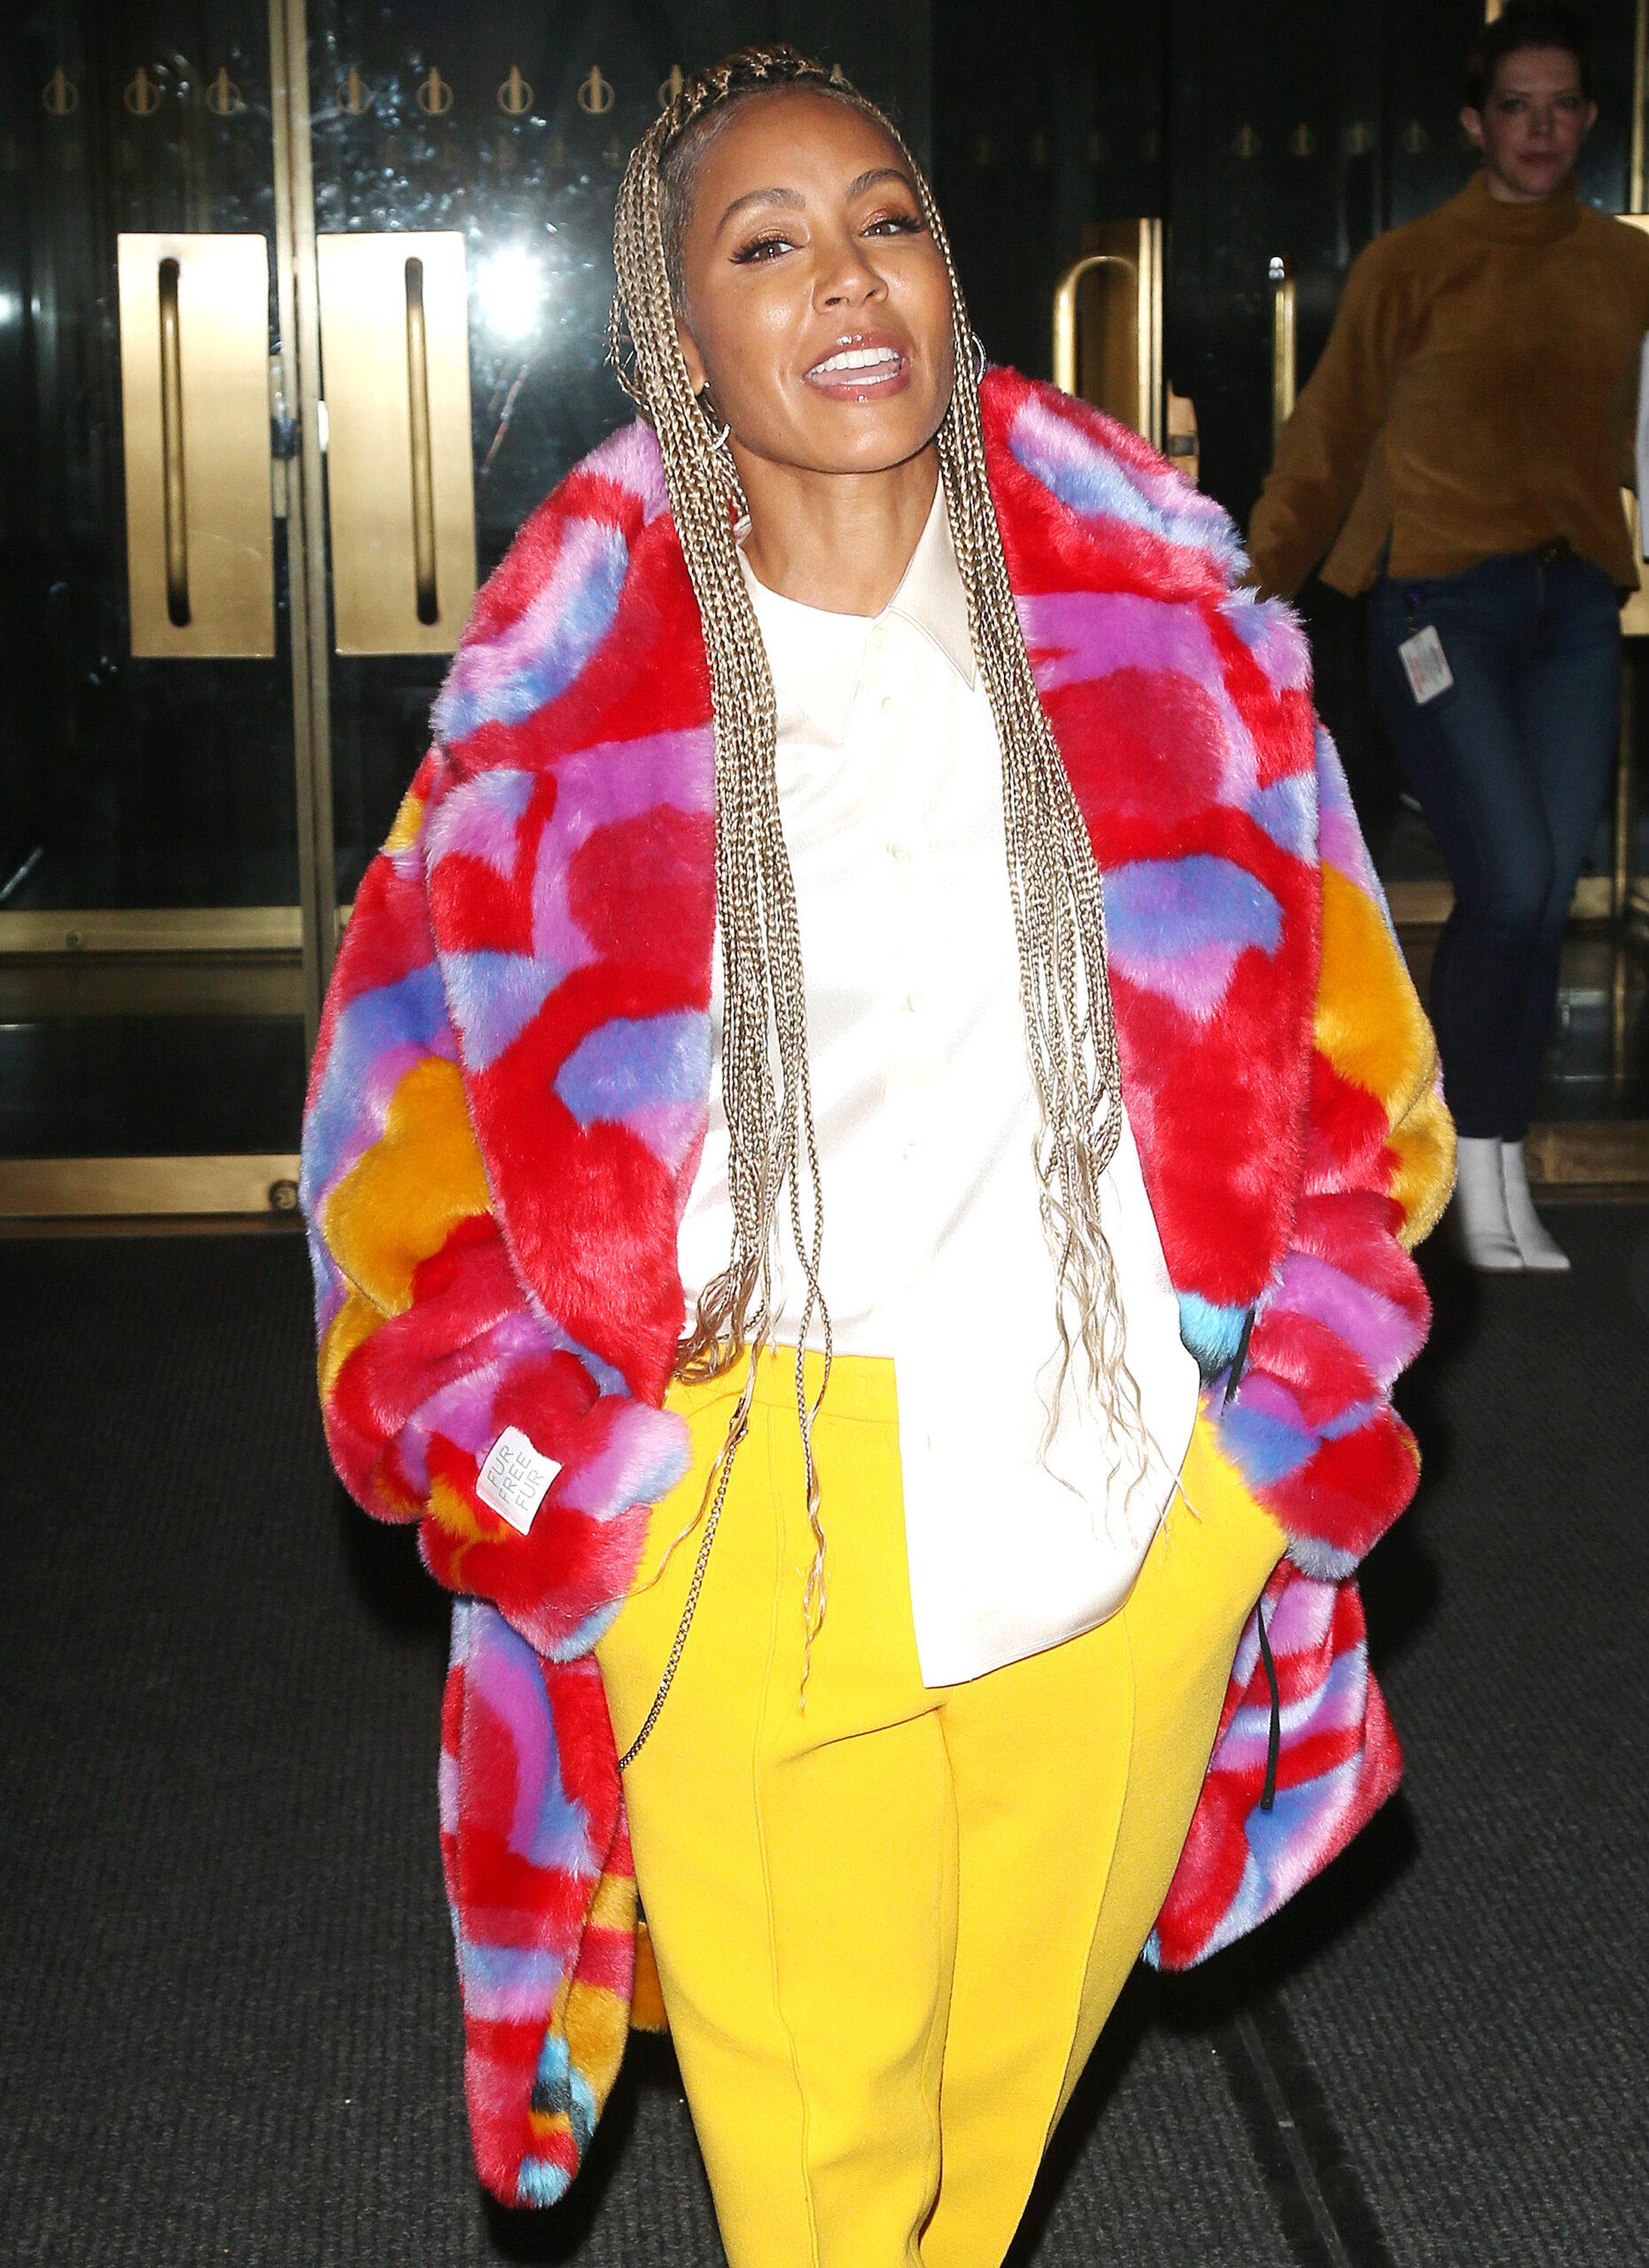 Jada Pinkett Smith out and about in New York City